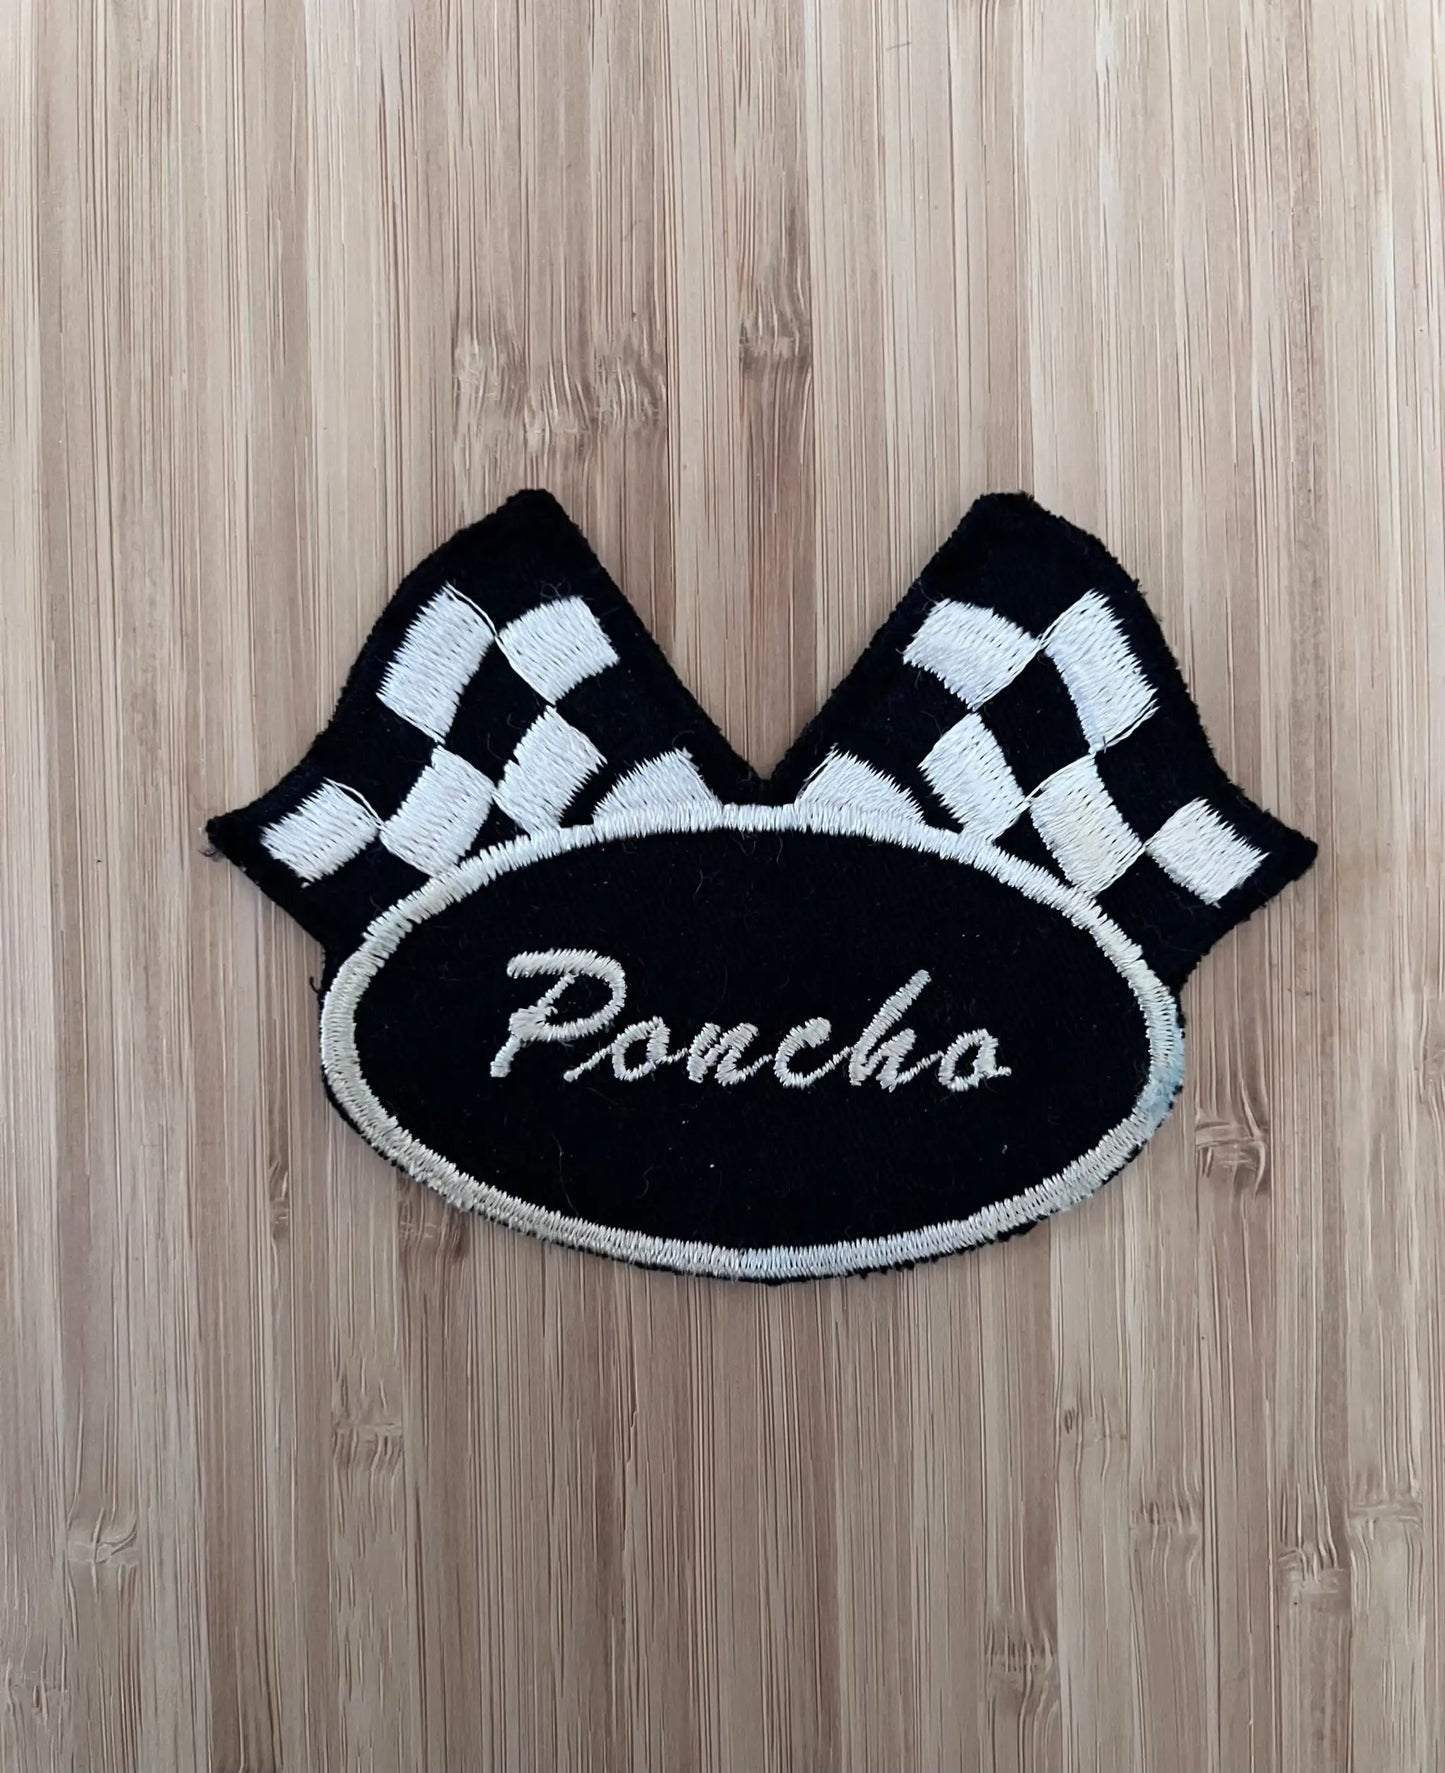 Pontiac Poncho Checkered Cross Flag Patch Vintage New Old Stock Very Rare Relic has been safely stored away for decades and measures approx 3.5 in x 4.5 in